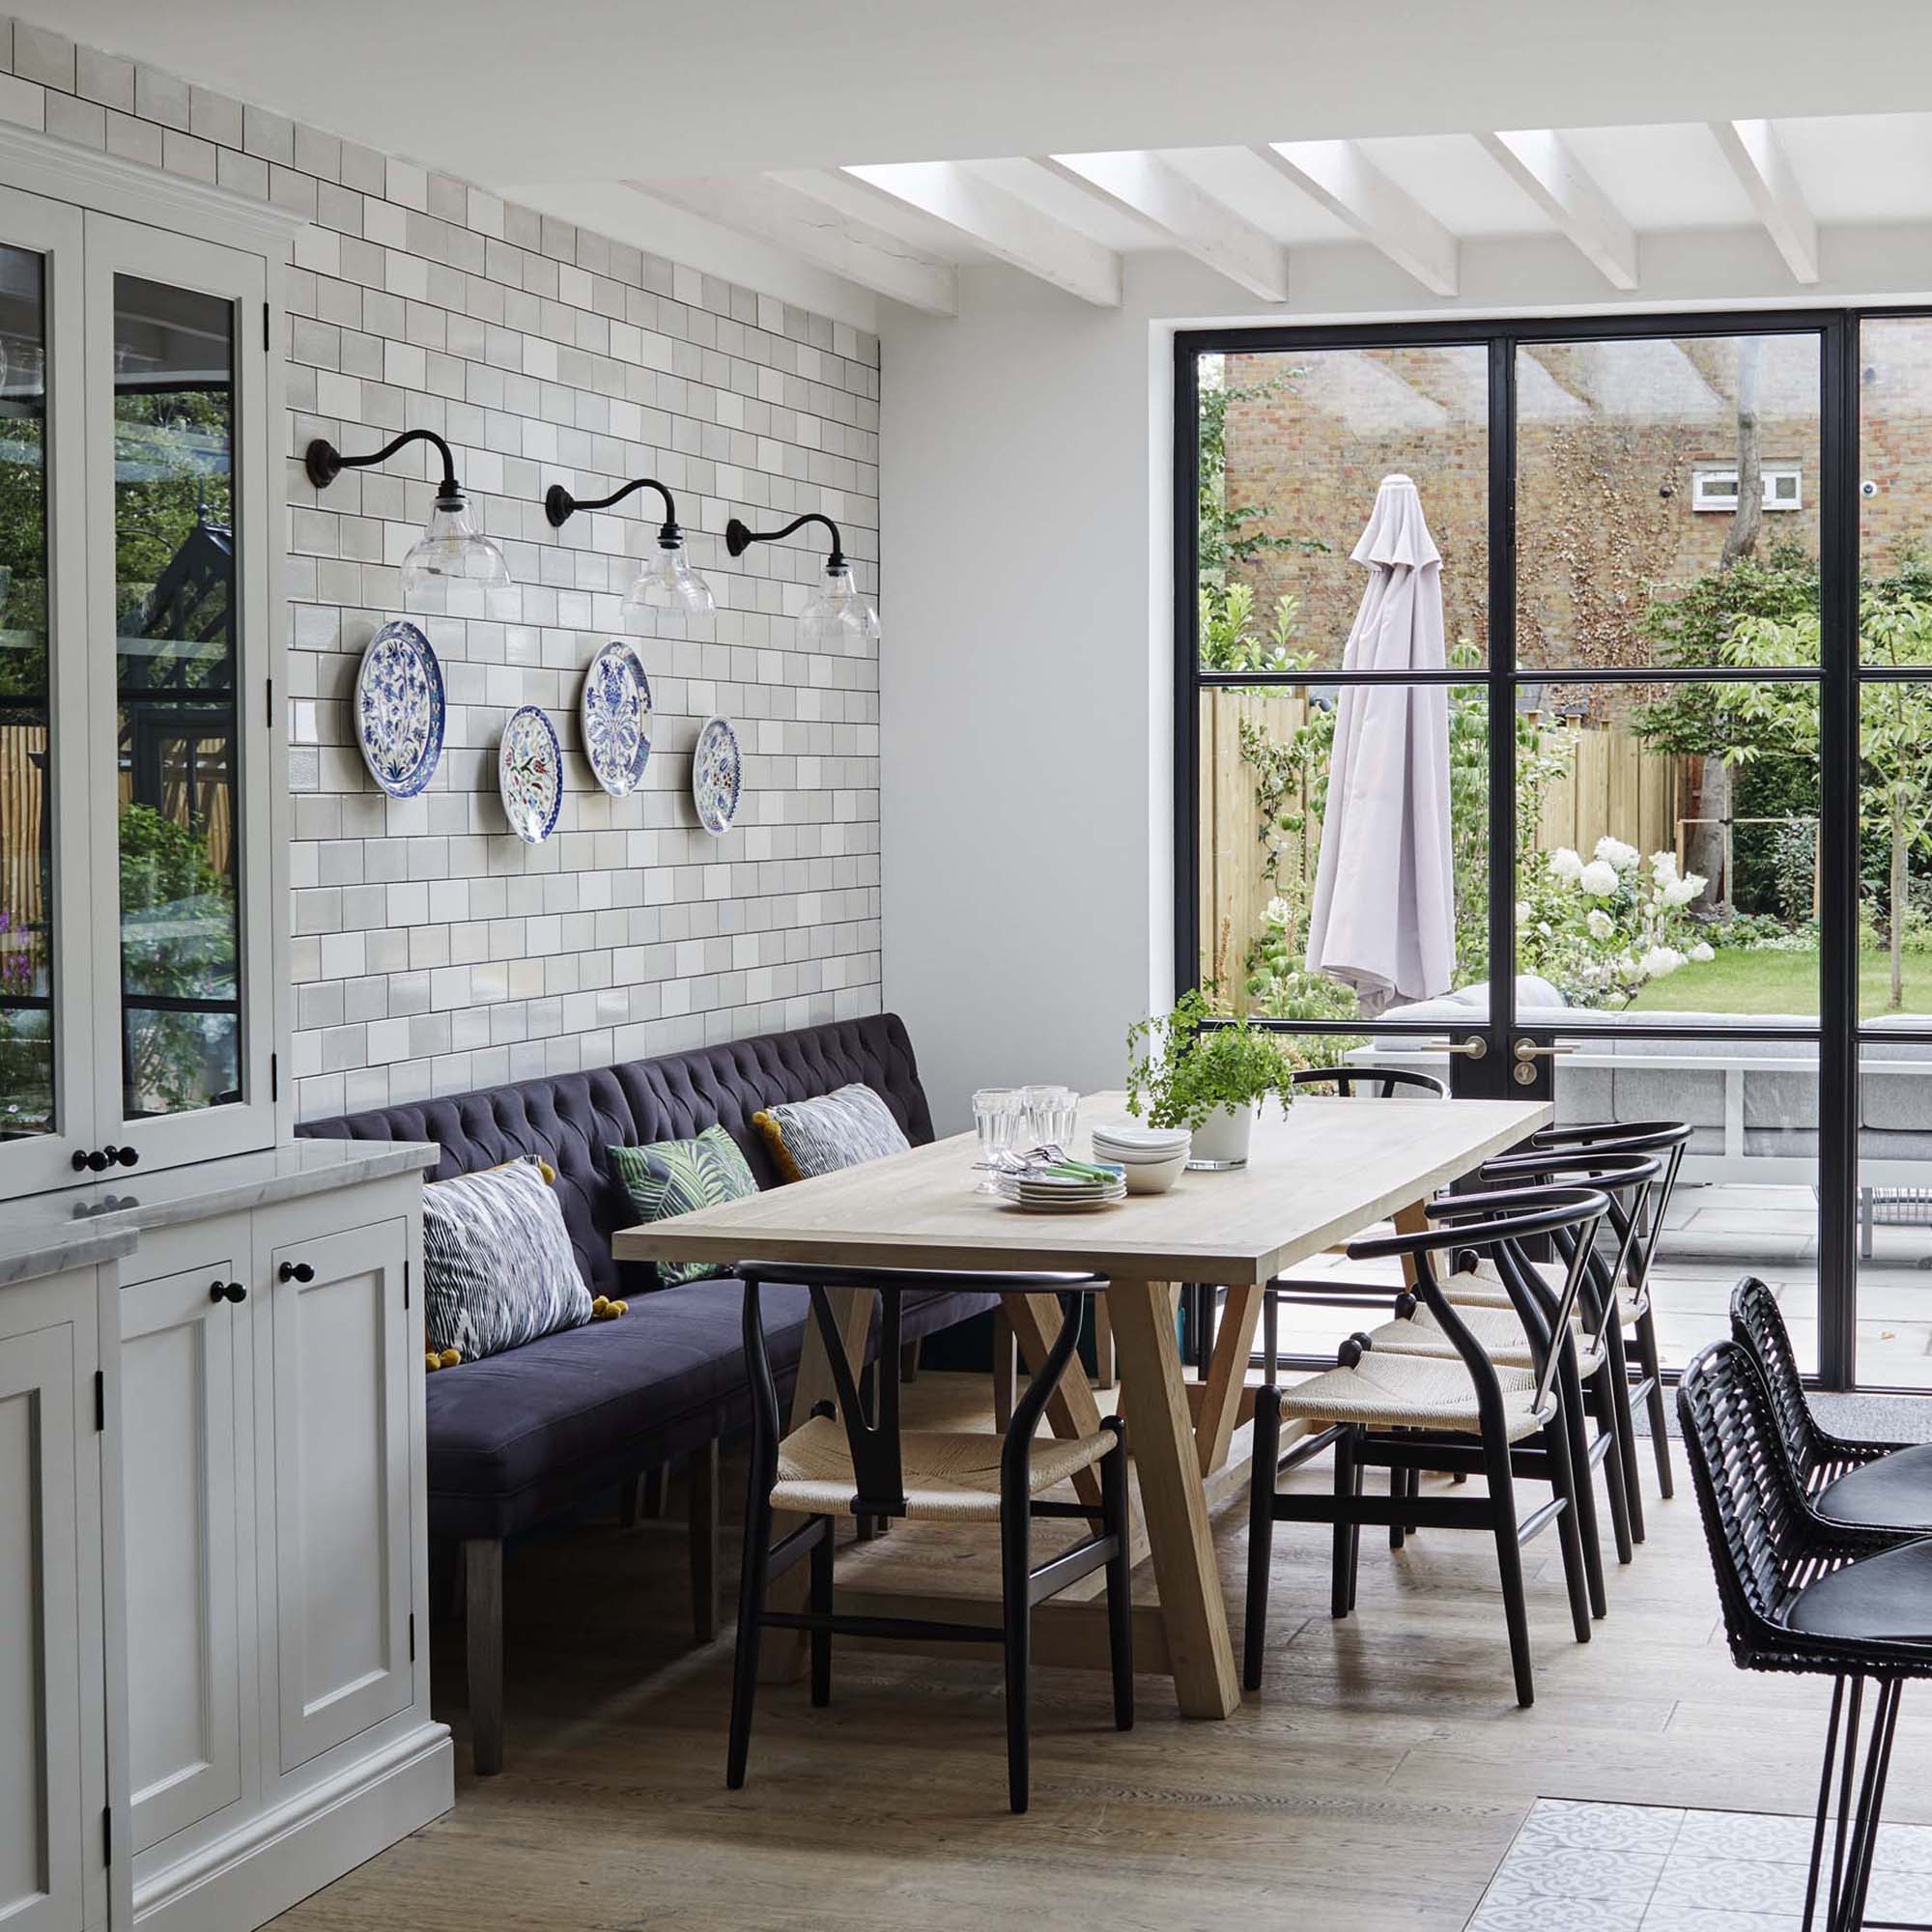 dine in style with these 10 ideas for banquette seating and